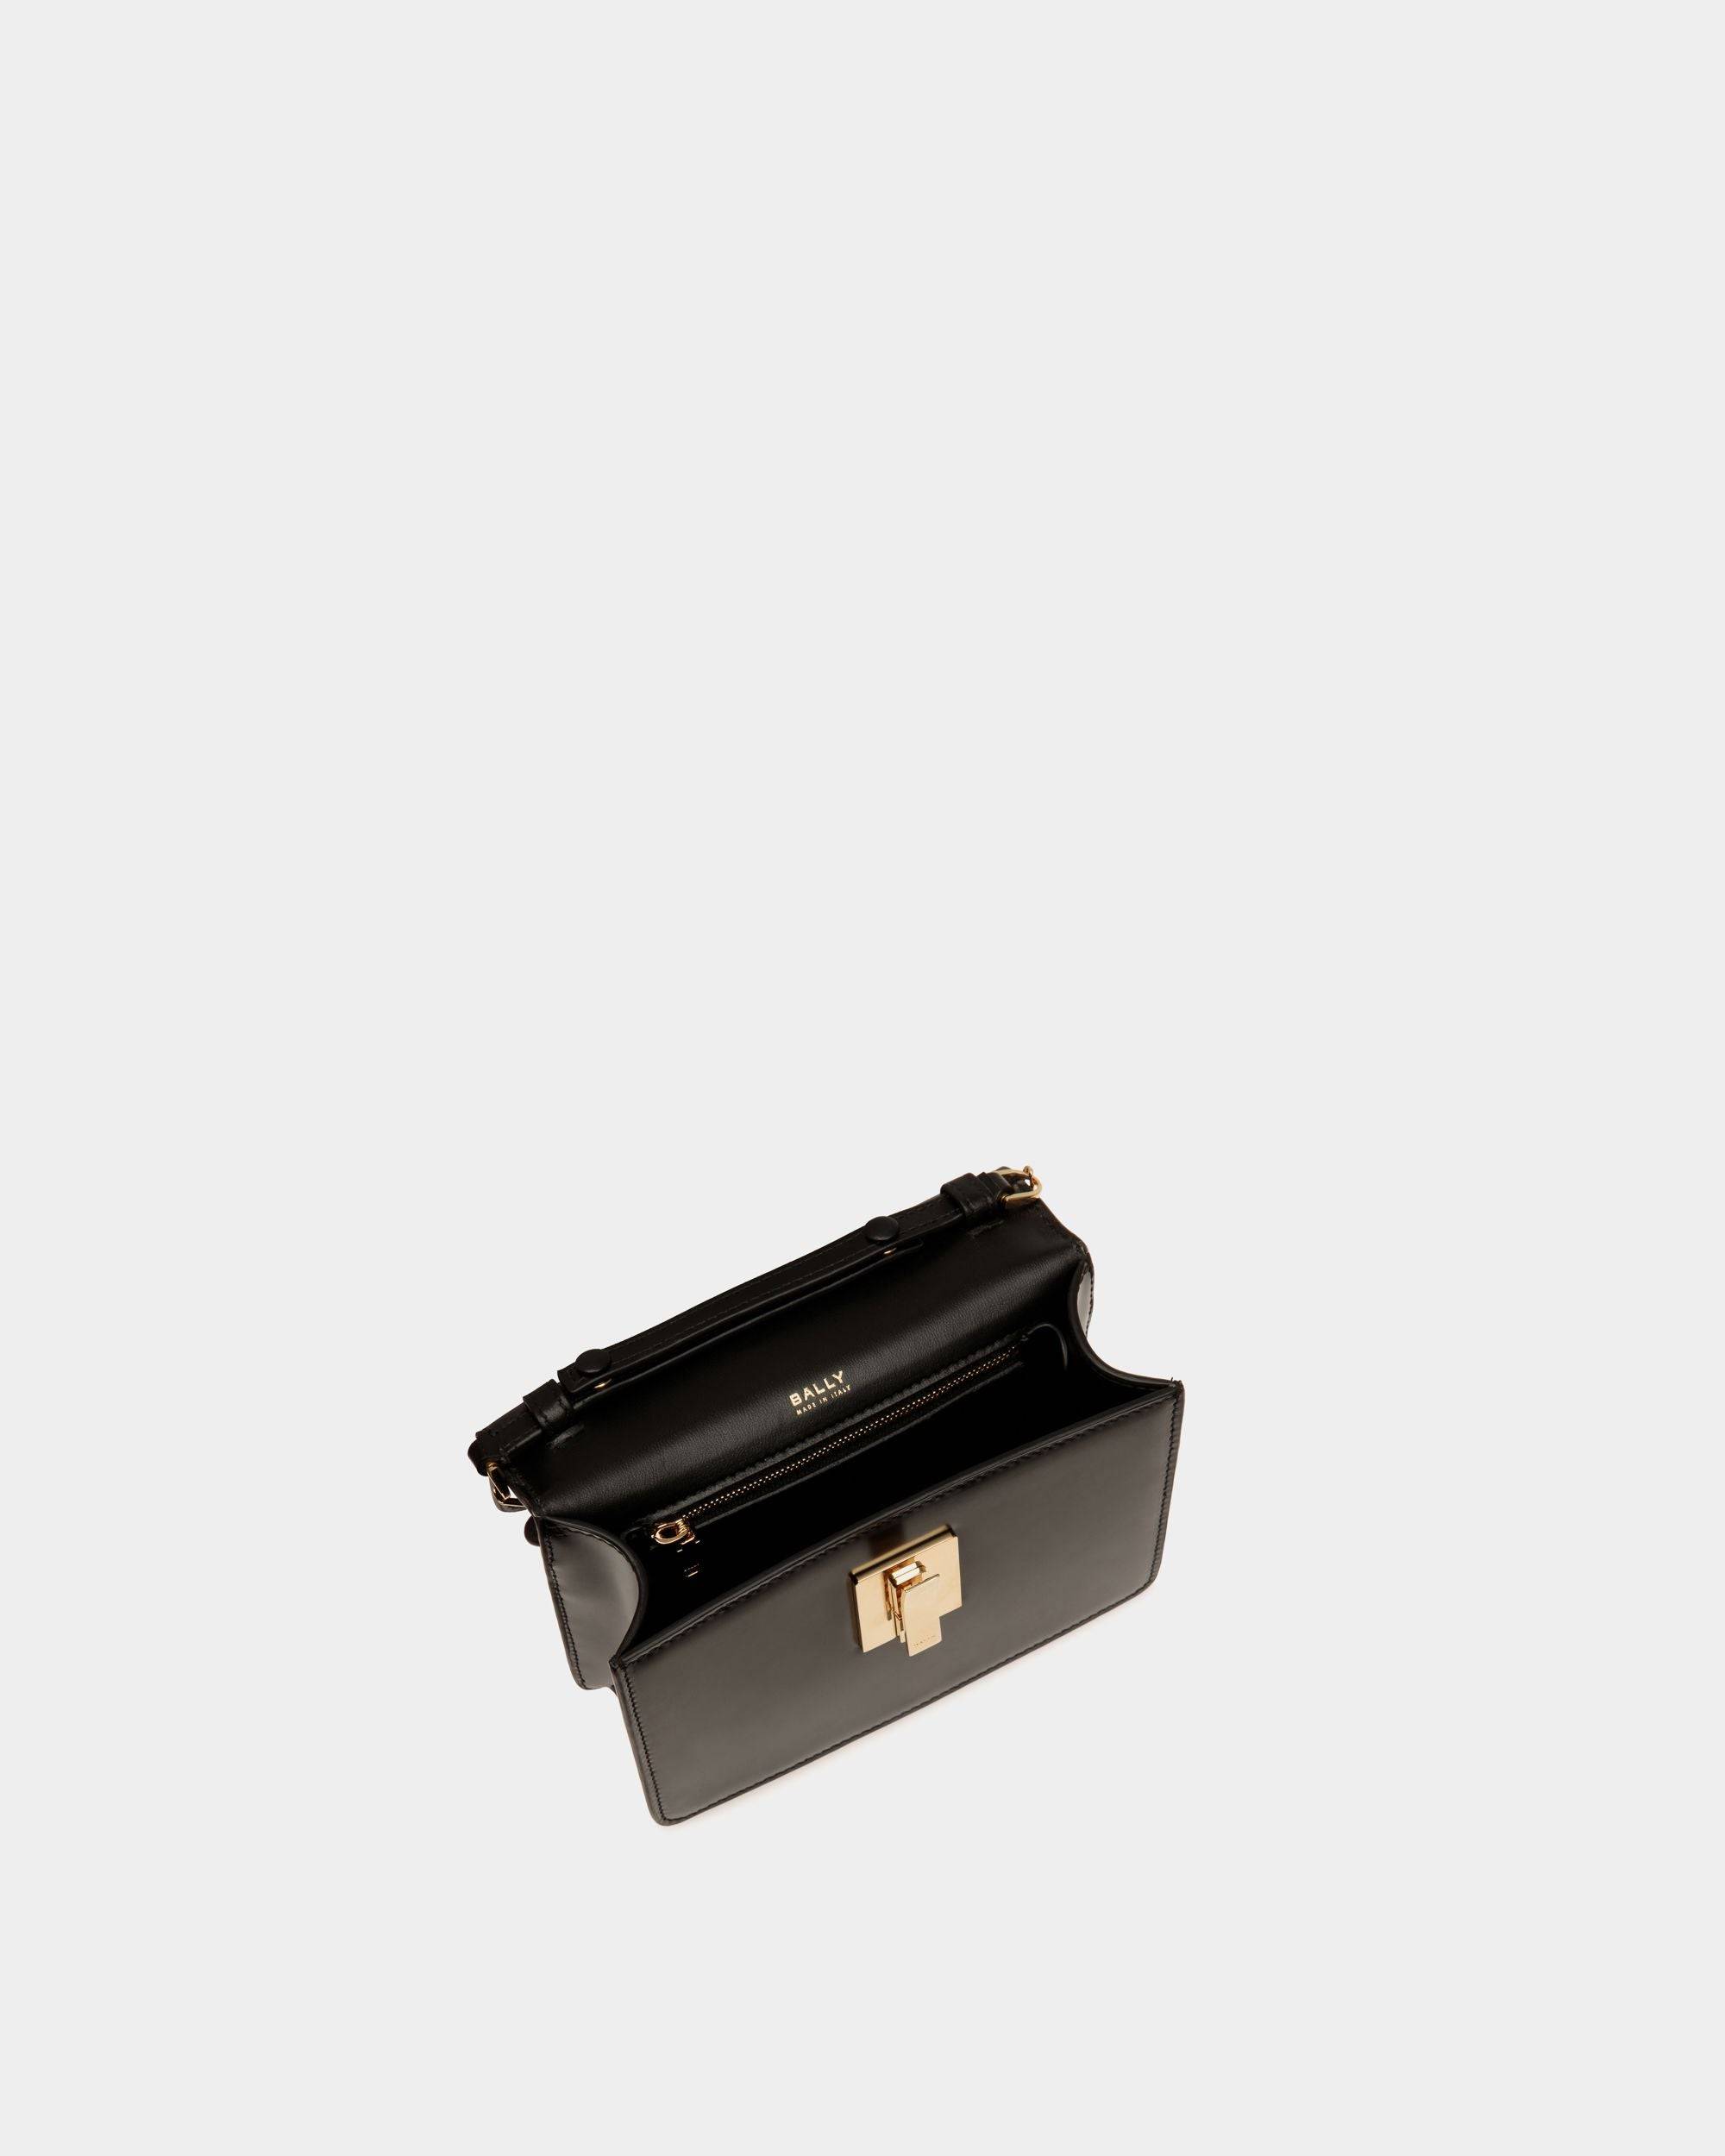 Ollam | Women's Mini Top Handle Bag in Black Brushed Leather | Bally | Still Life Open / Inside